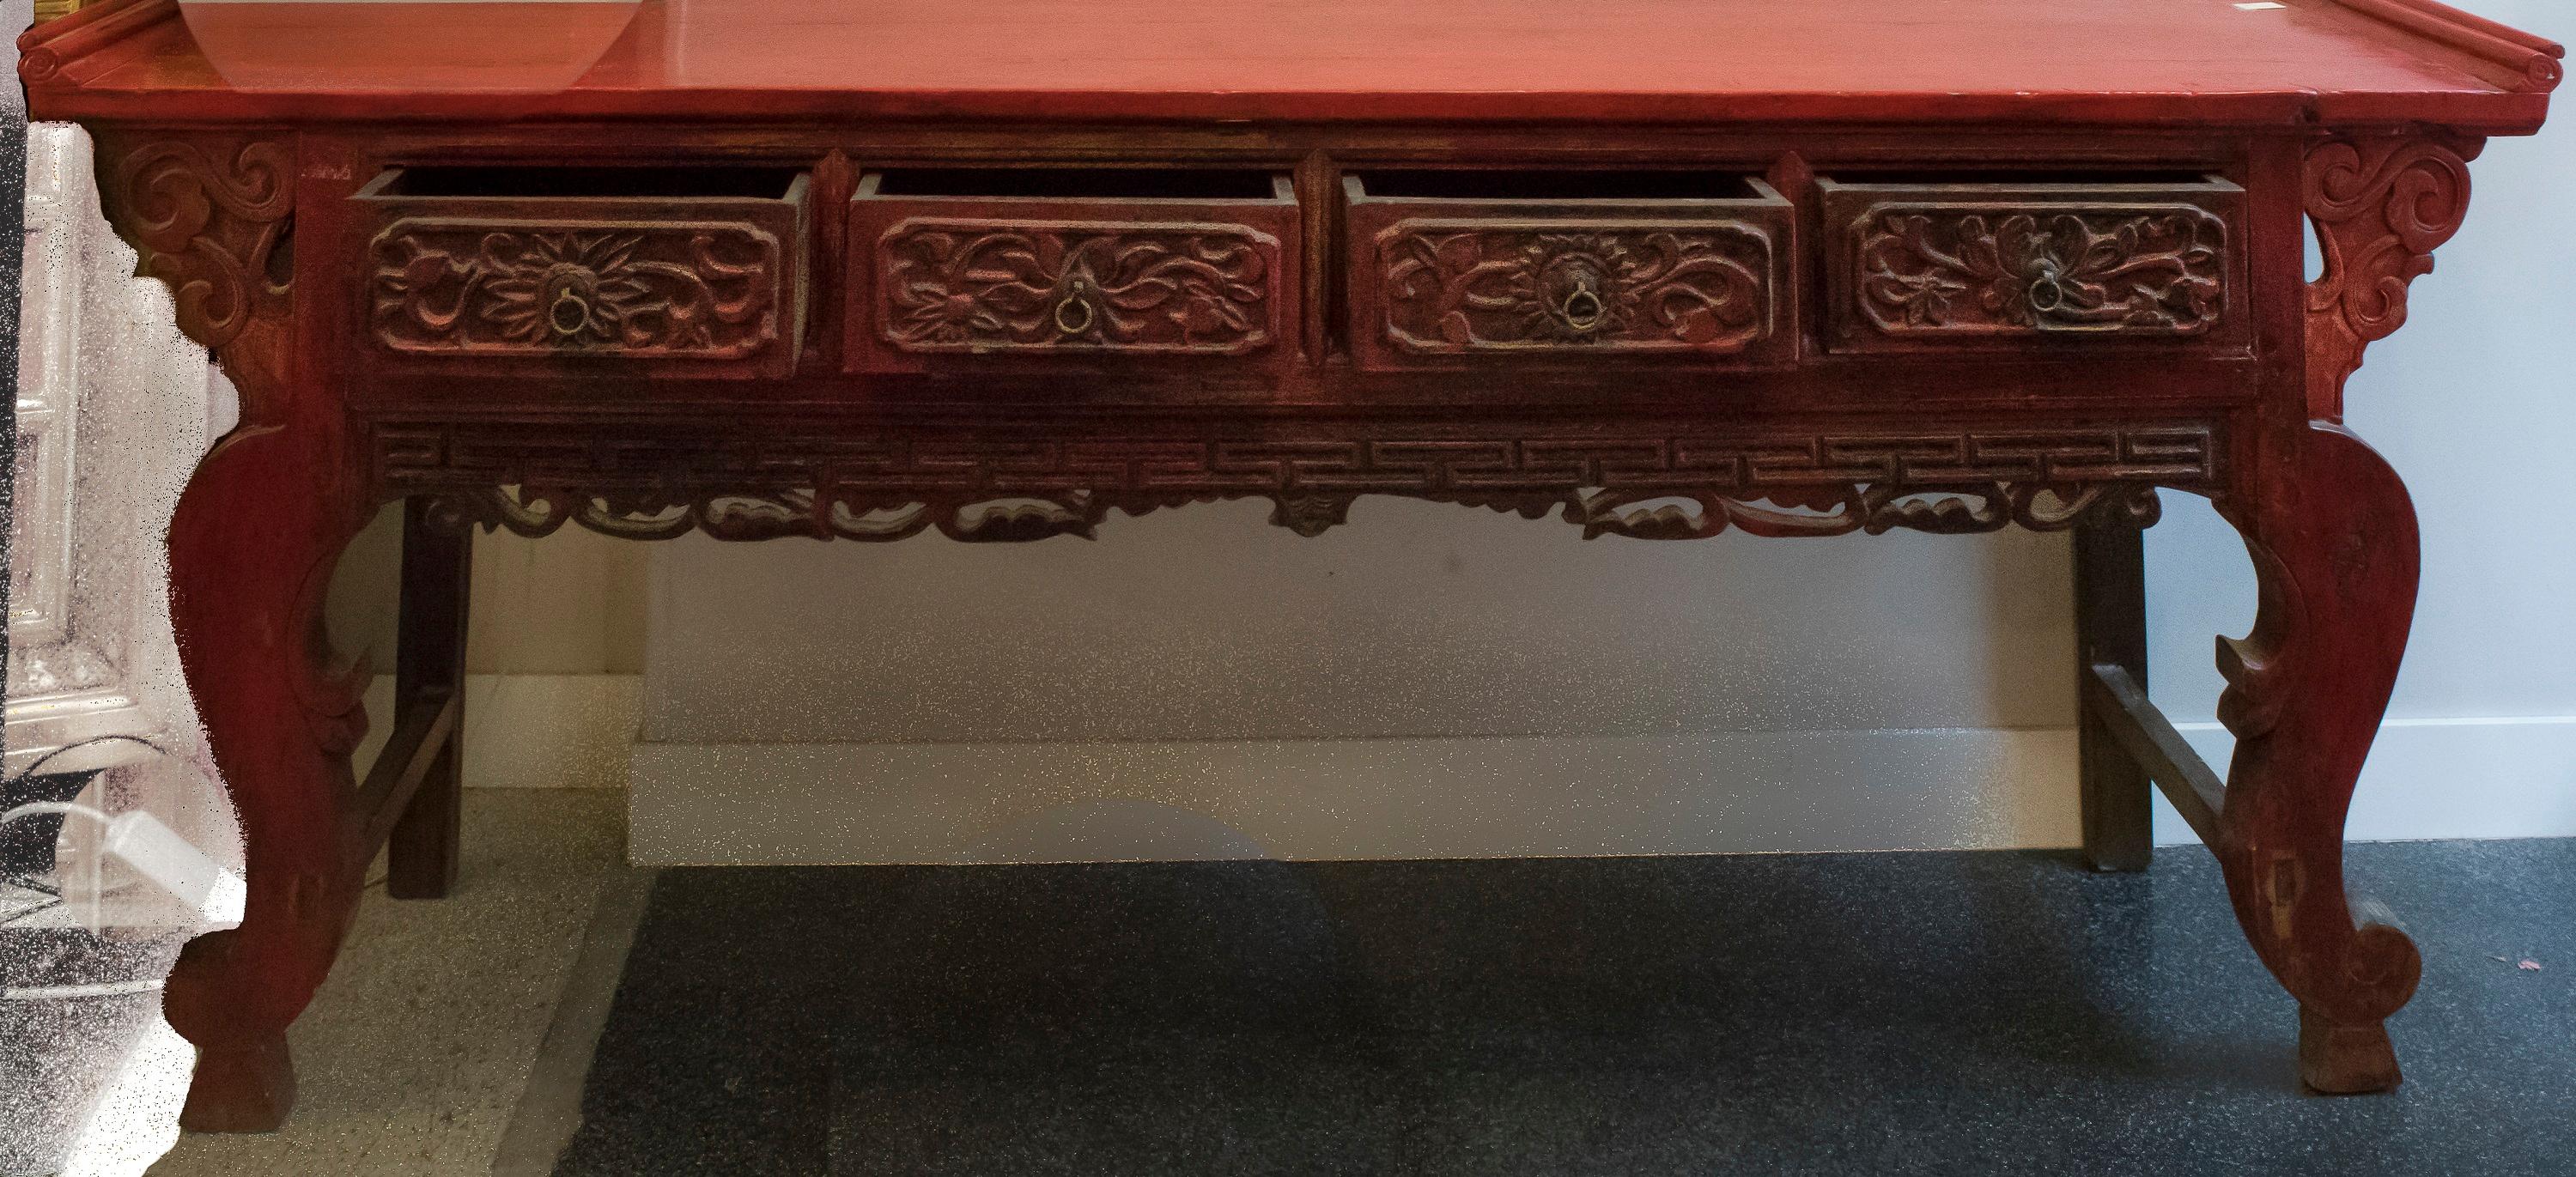 Stunning 19th century red lacquered and carved Chinese console, with four drawers.
From a very important French private collection in Bordeaux.
Very good condition.